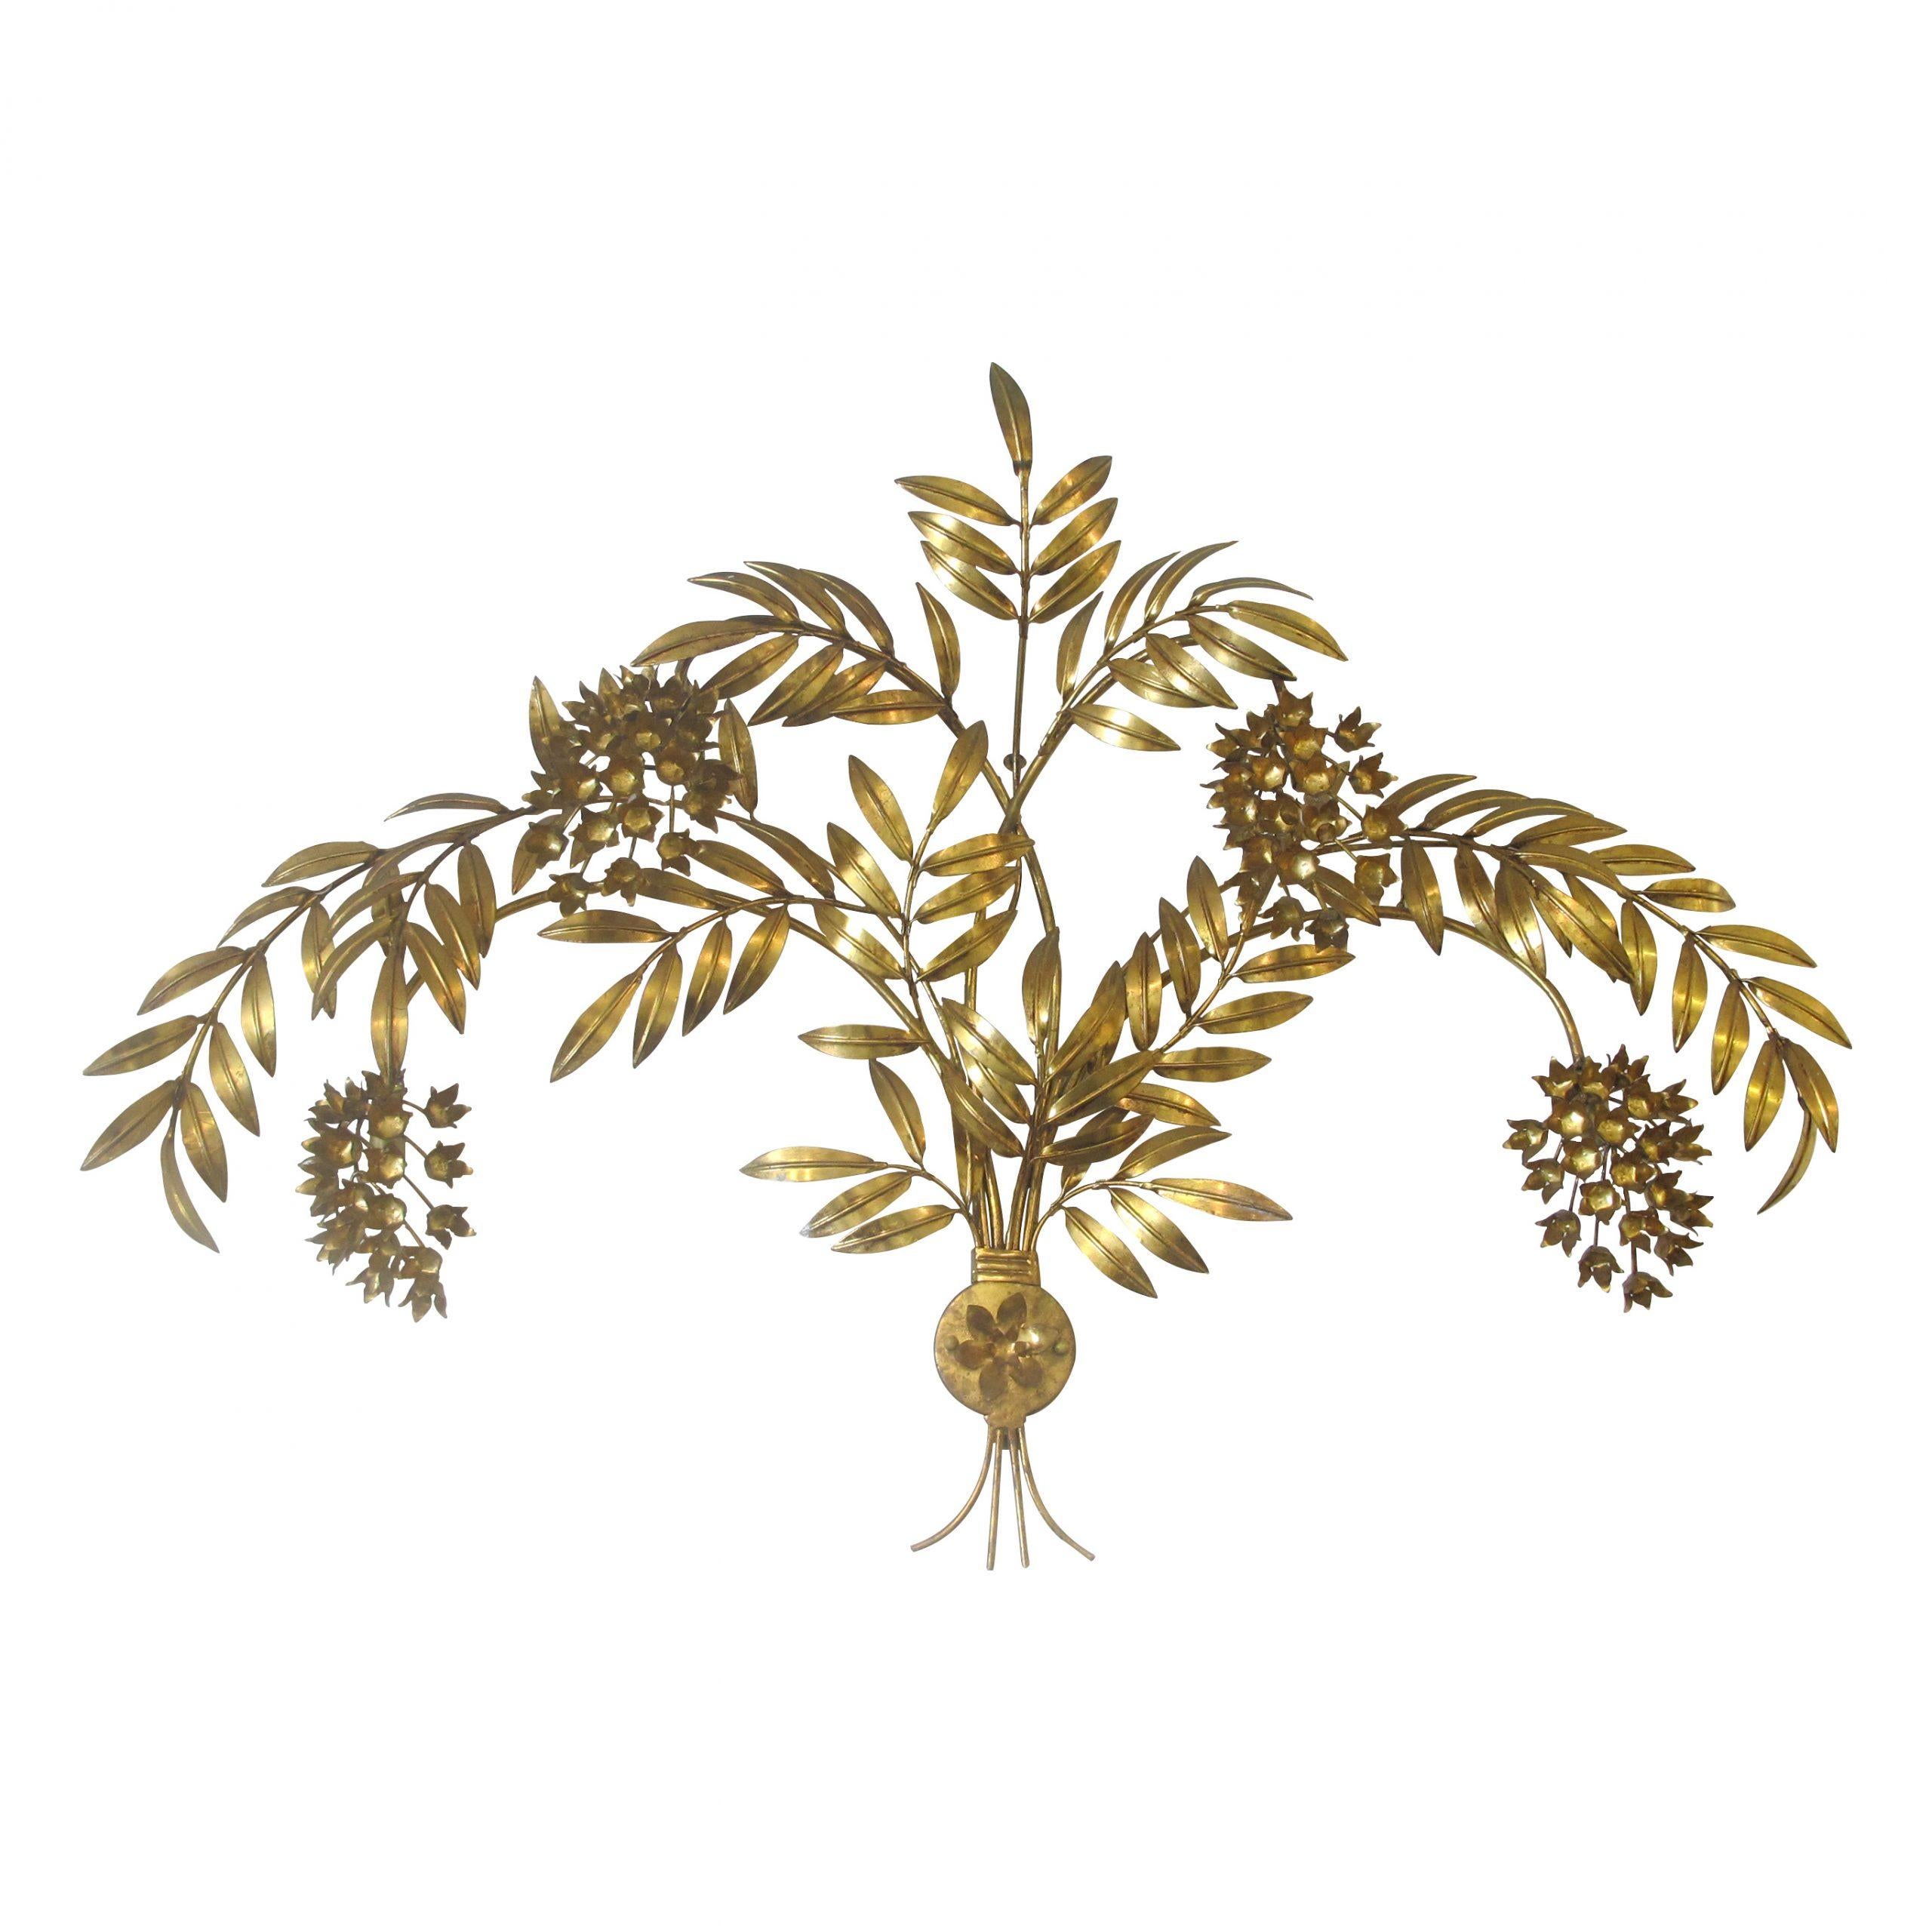 A large gilt metal Wisteria wall light, model “Pioggia d'Ore” by Hans Kögl, German 1960s.

This large structural decorative wall light has four light bulbs, one under each of the Wisteria's flower grapes. When the wall light is lit, the shadows